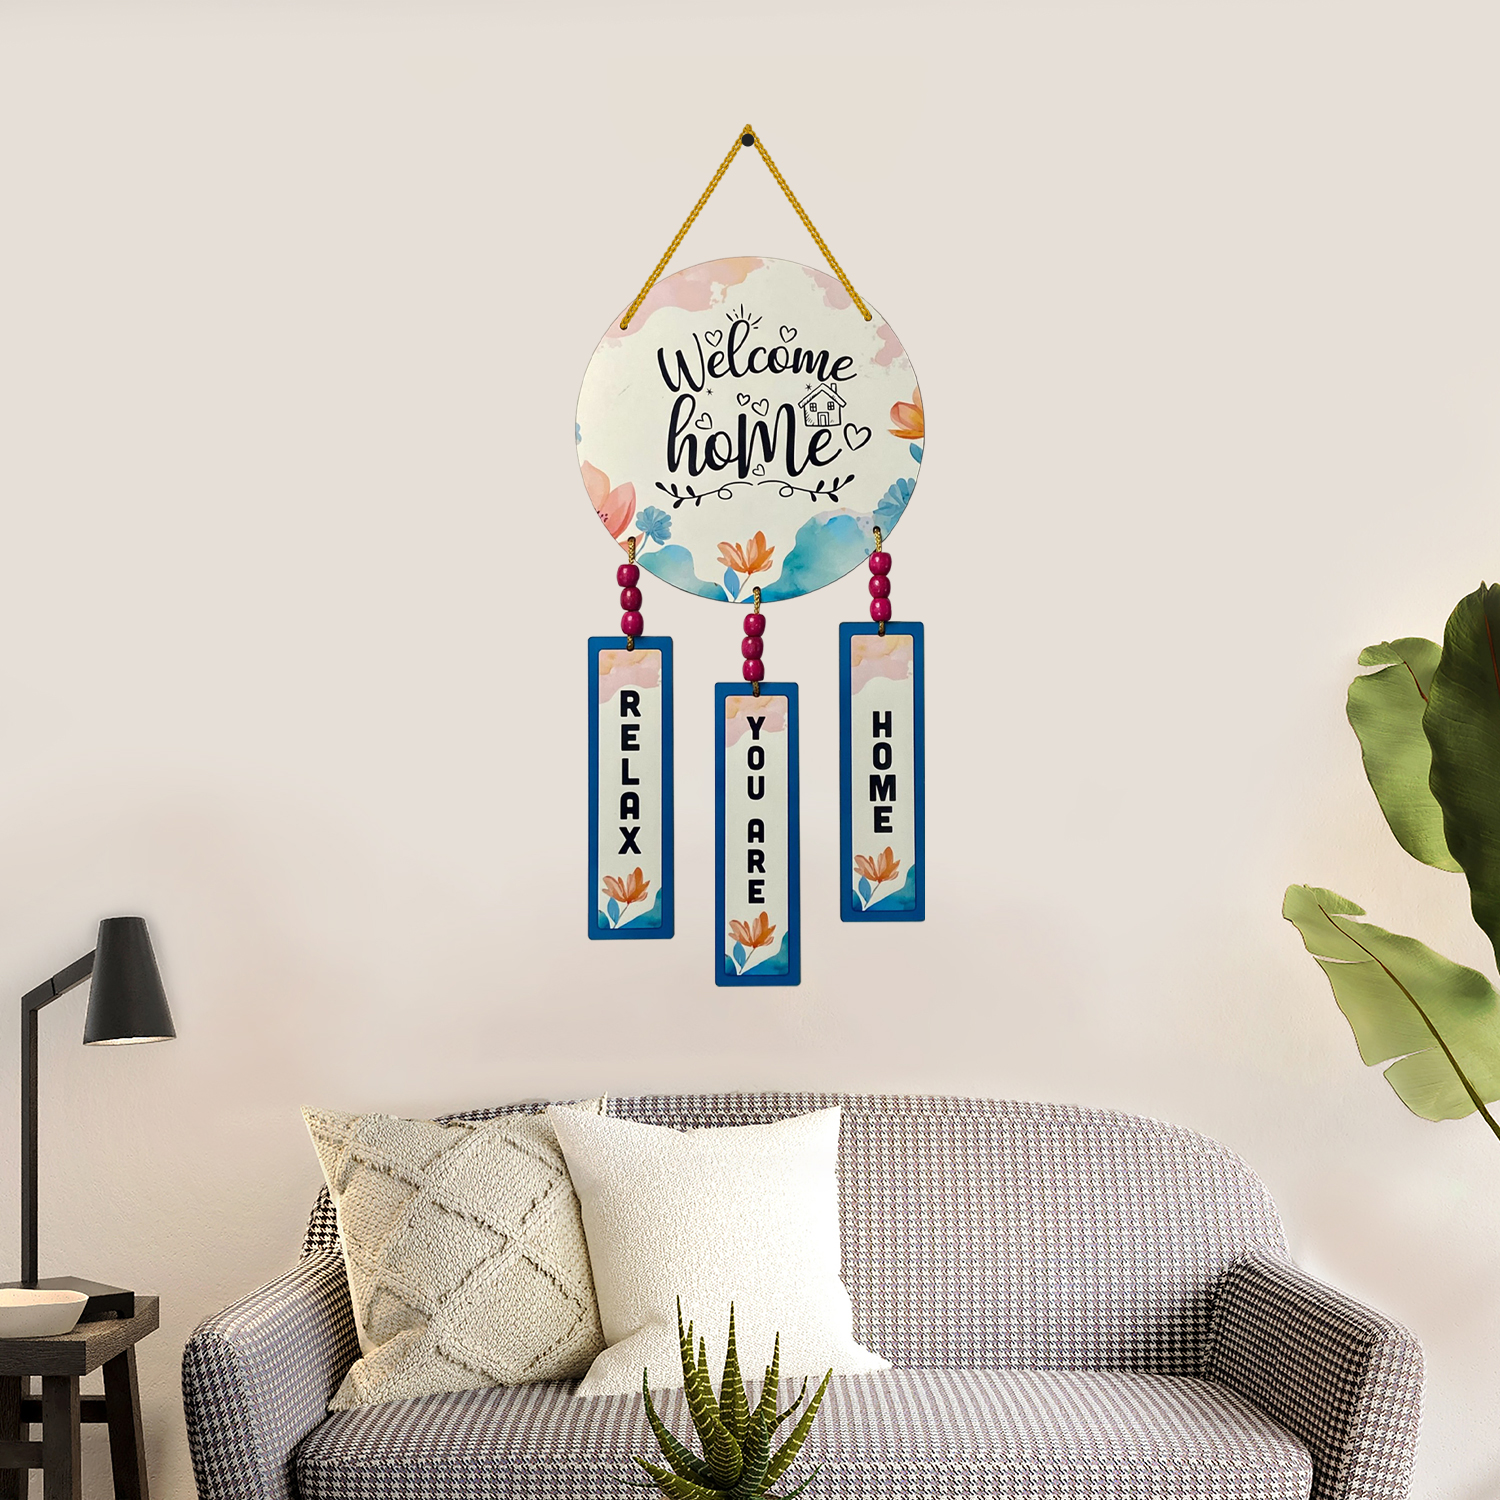 Home Comfort: Relax You Are Home Wooden Wall Hanging